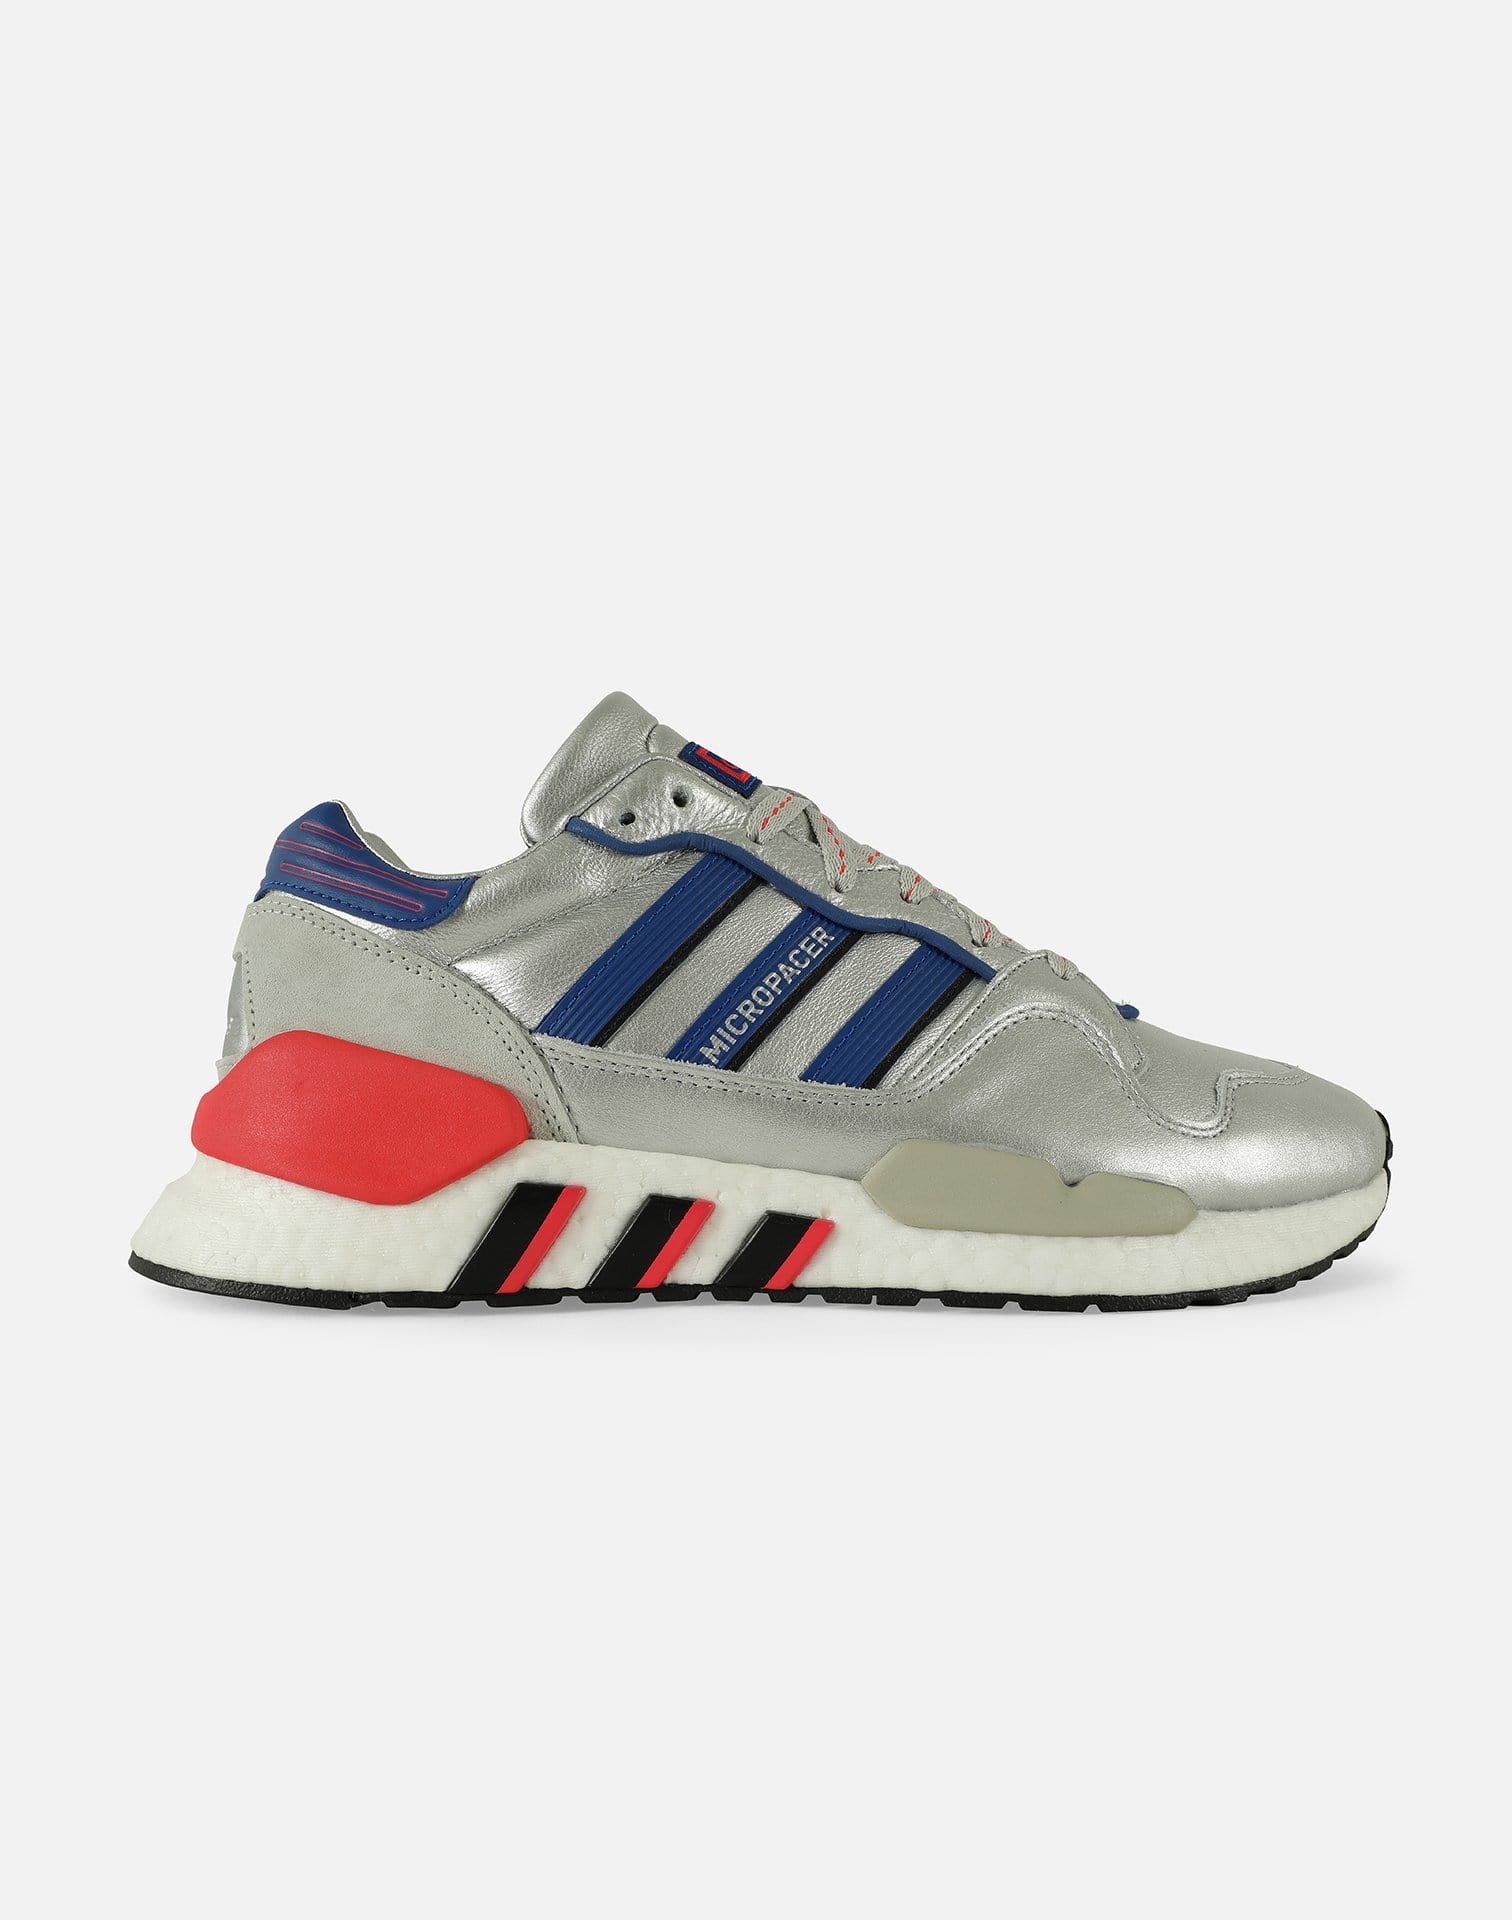 adidas zx930 eqt micropacer